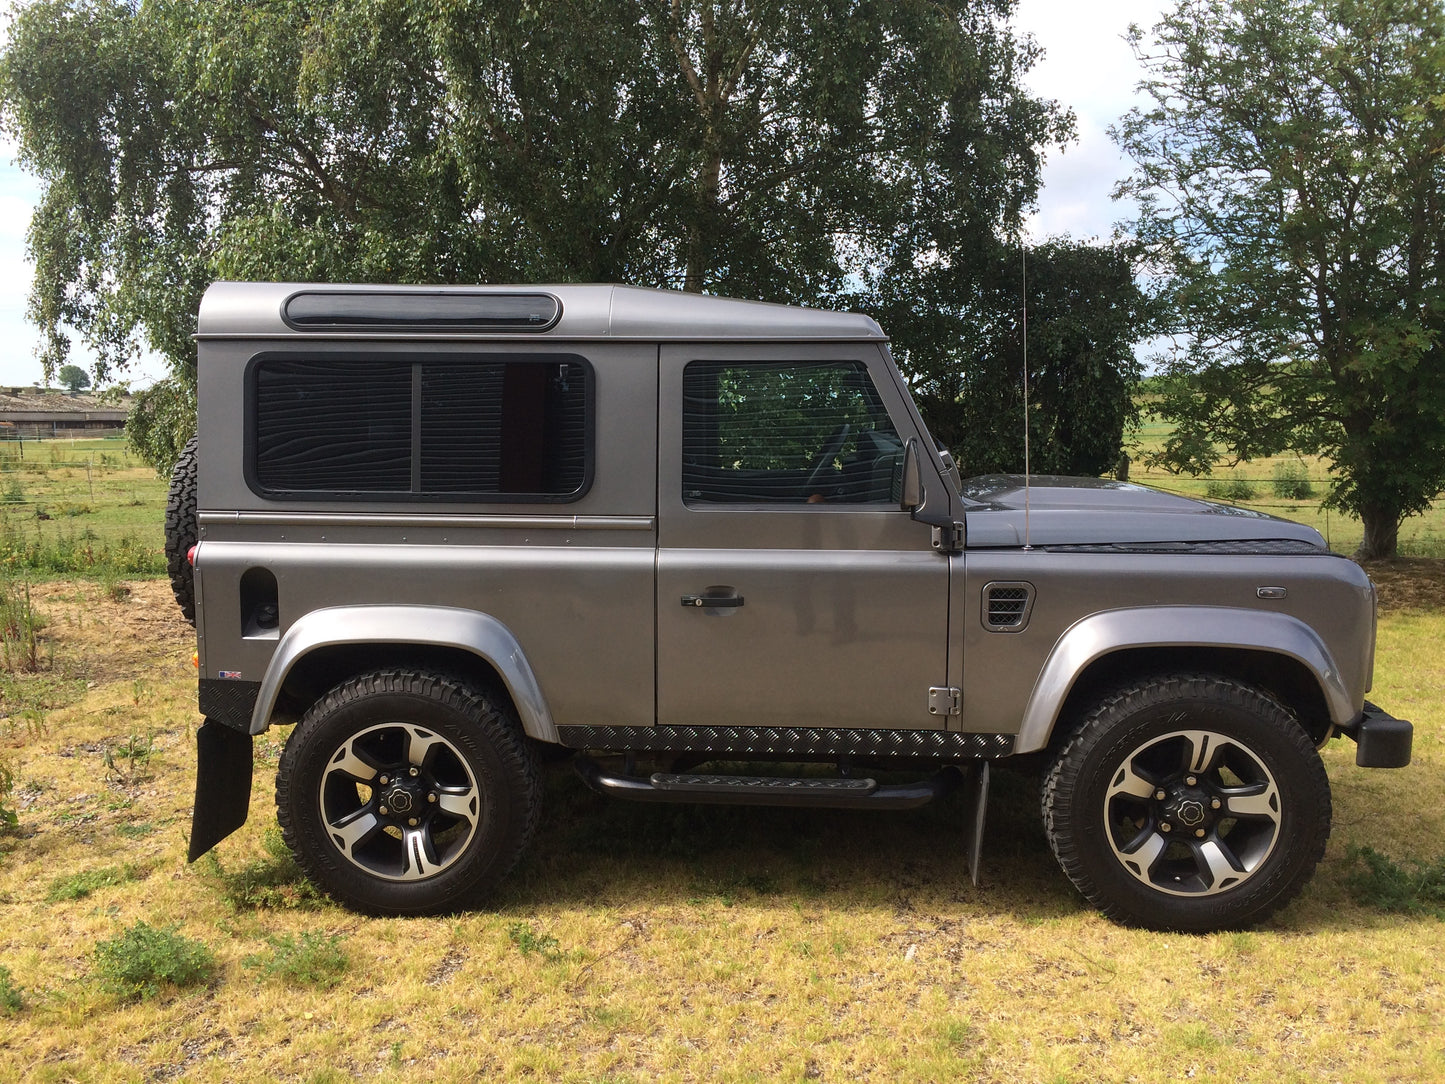 SOLD Land Rover Defender 90 OVERFINCH Bespoke project.